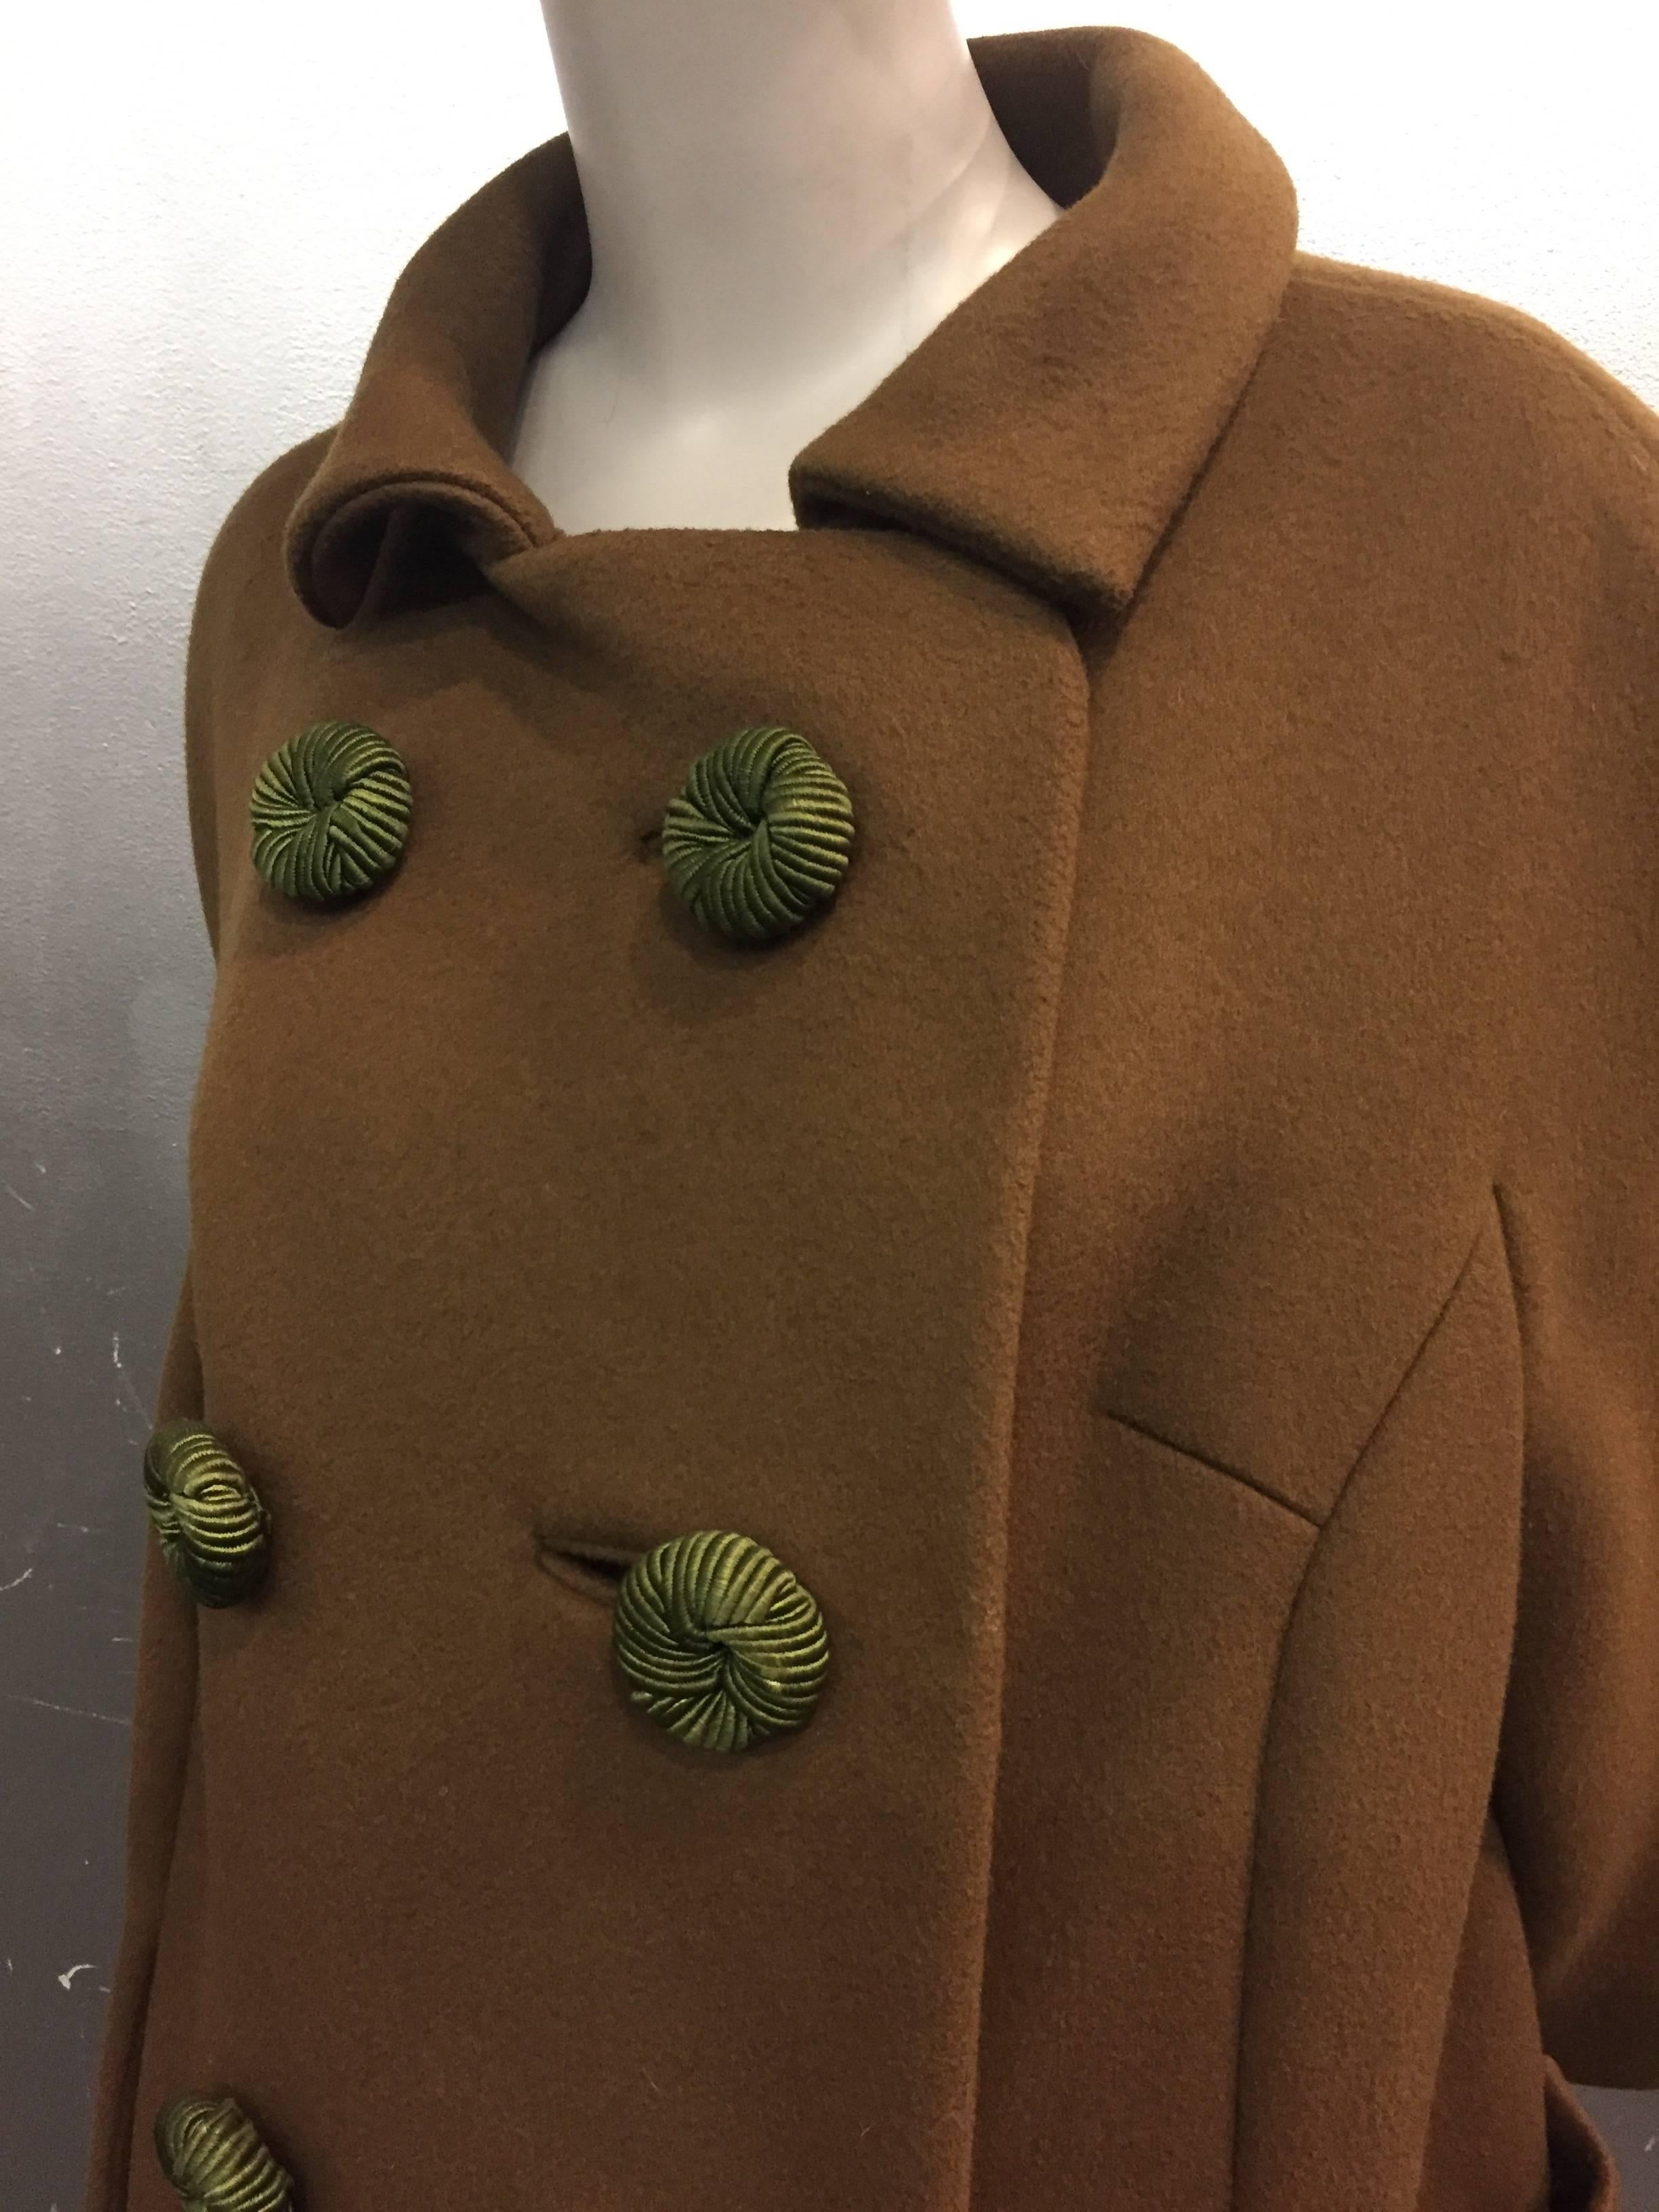 A highly stylized double-breasted  heavy weight wool coat with streamline seaming, 3/4 length sleeve and pouch pockets.

Beautiful coordinating braided buttons and fully lined.

This coat will keep you warm and toasty! 